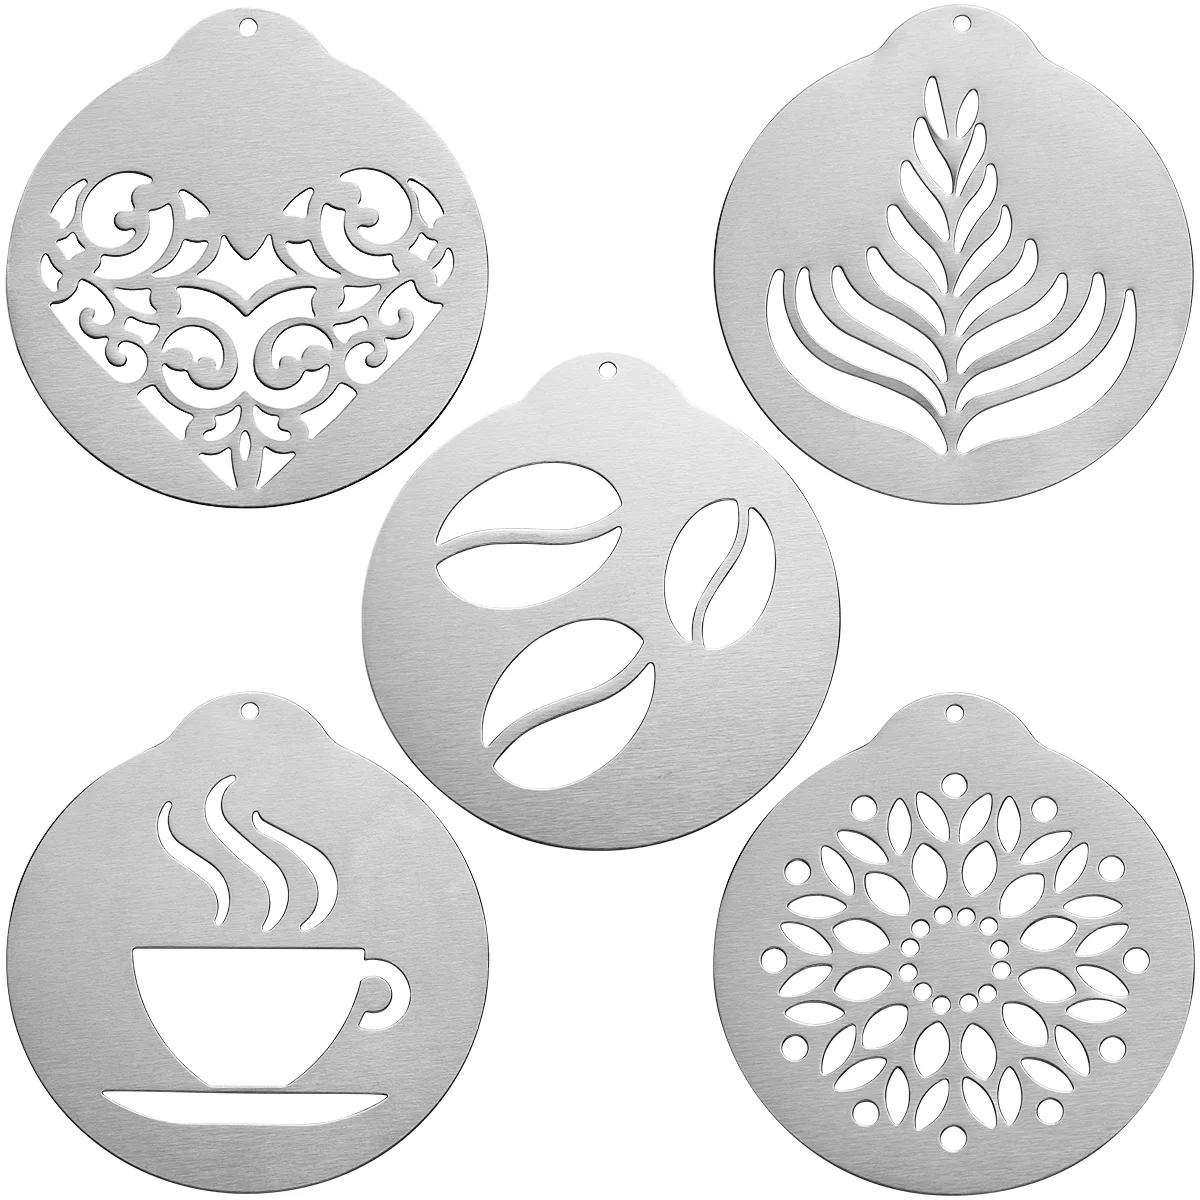 

Coffee Stencils Latte Cake Decorating Cappuccino Shaker Templates Chocolate Tool Cup Cookie Garland Mold Sprinkler Pen Bar